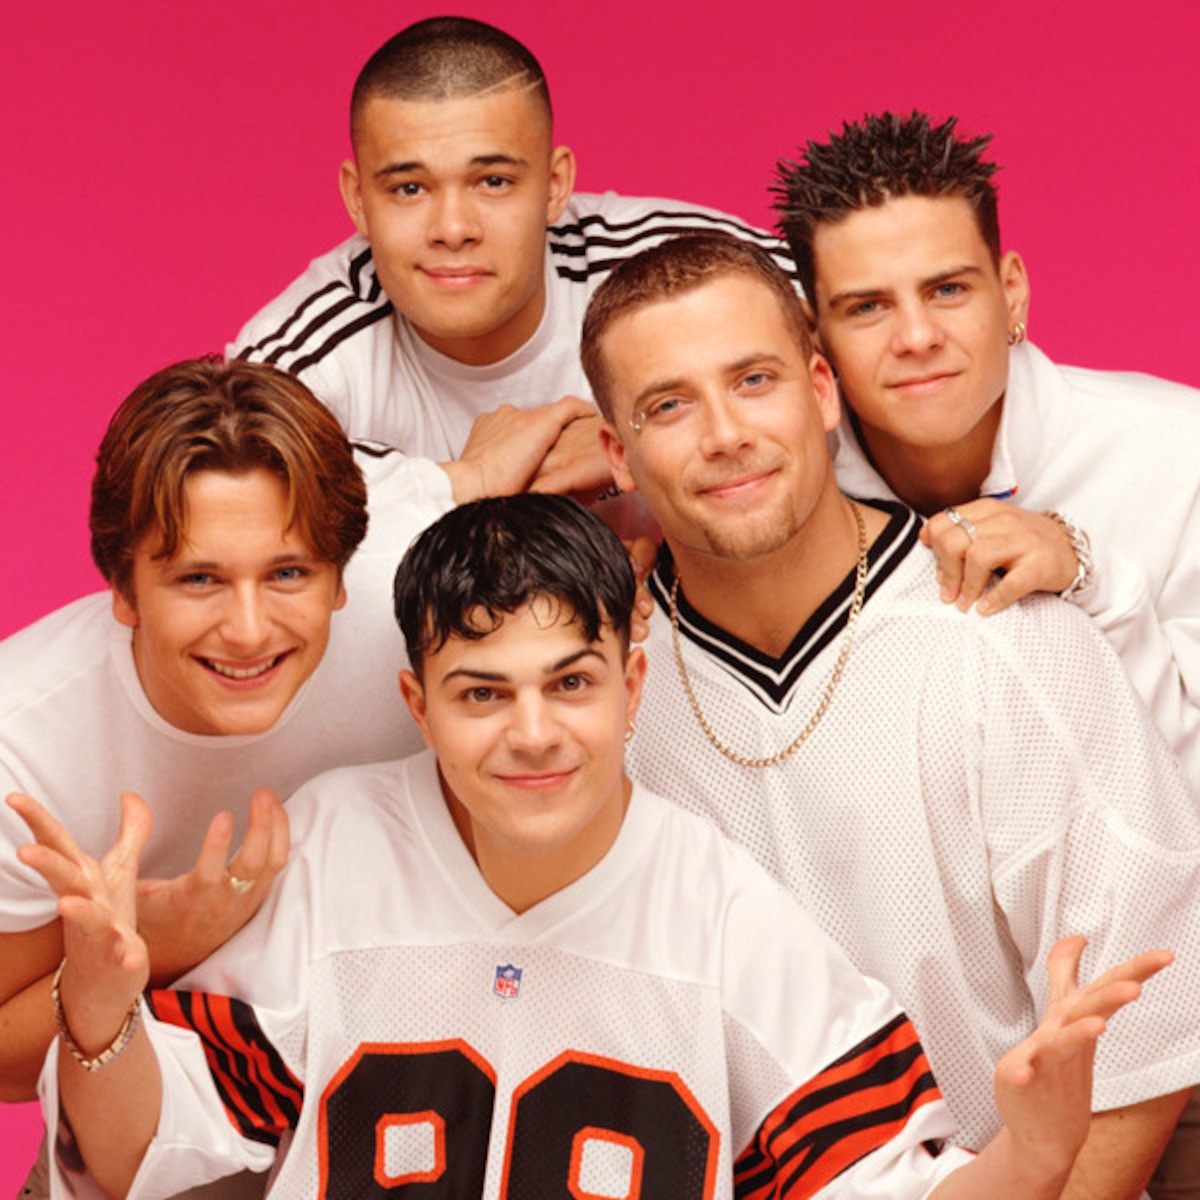 Skriv email kaskade symmetri All the Boy Bands You Completely Forgot About From the '90s - E! Online